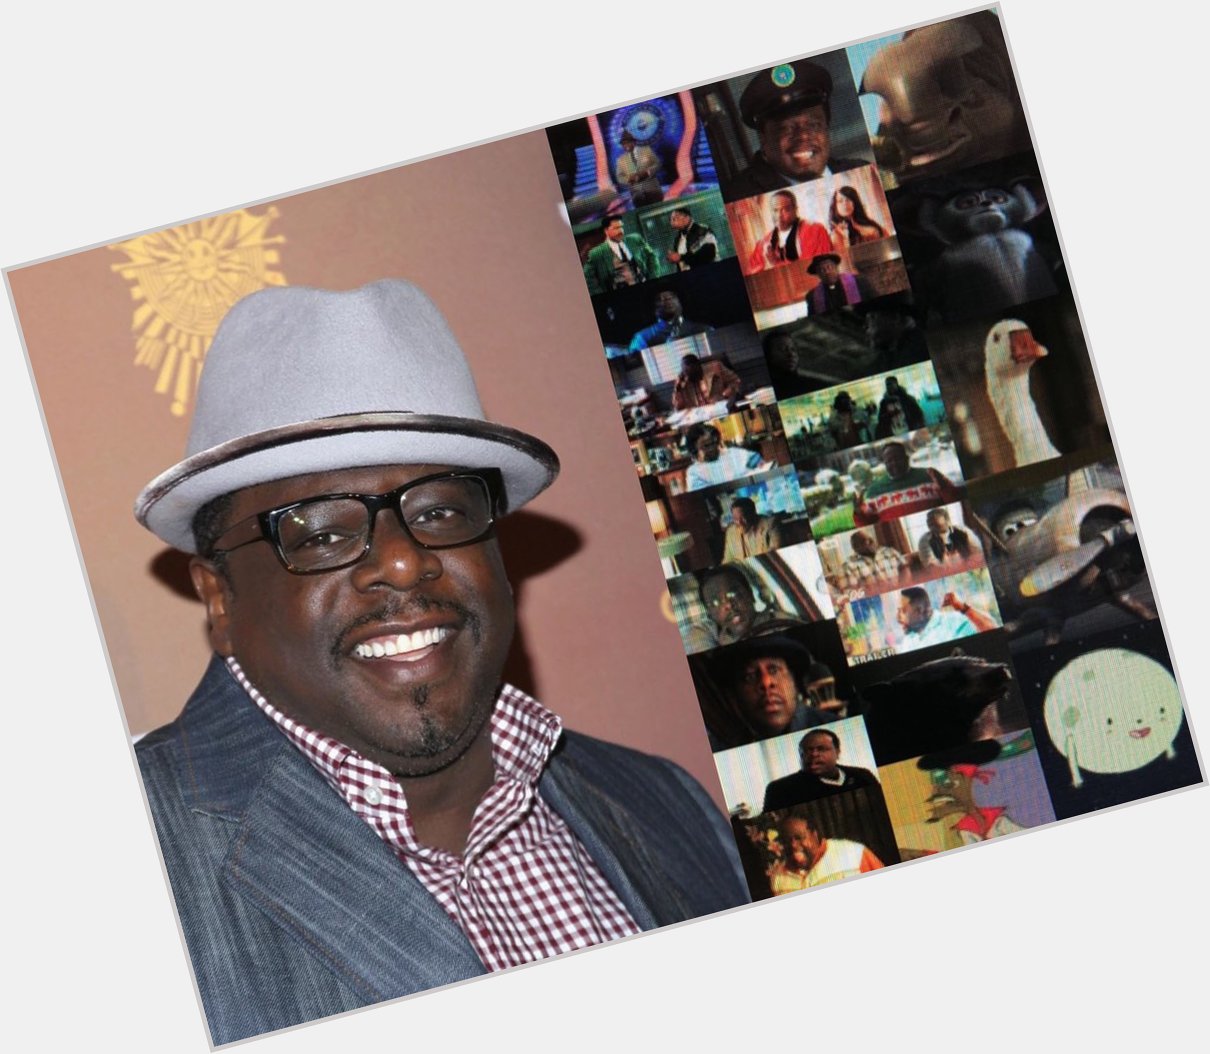 Happy 57th Birthday to Cedric the Entertainer! 